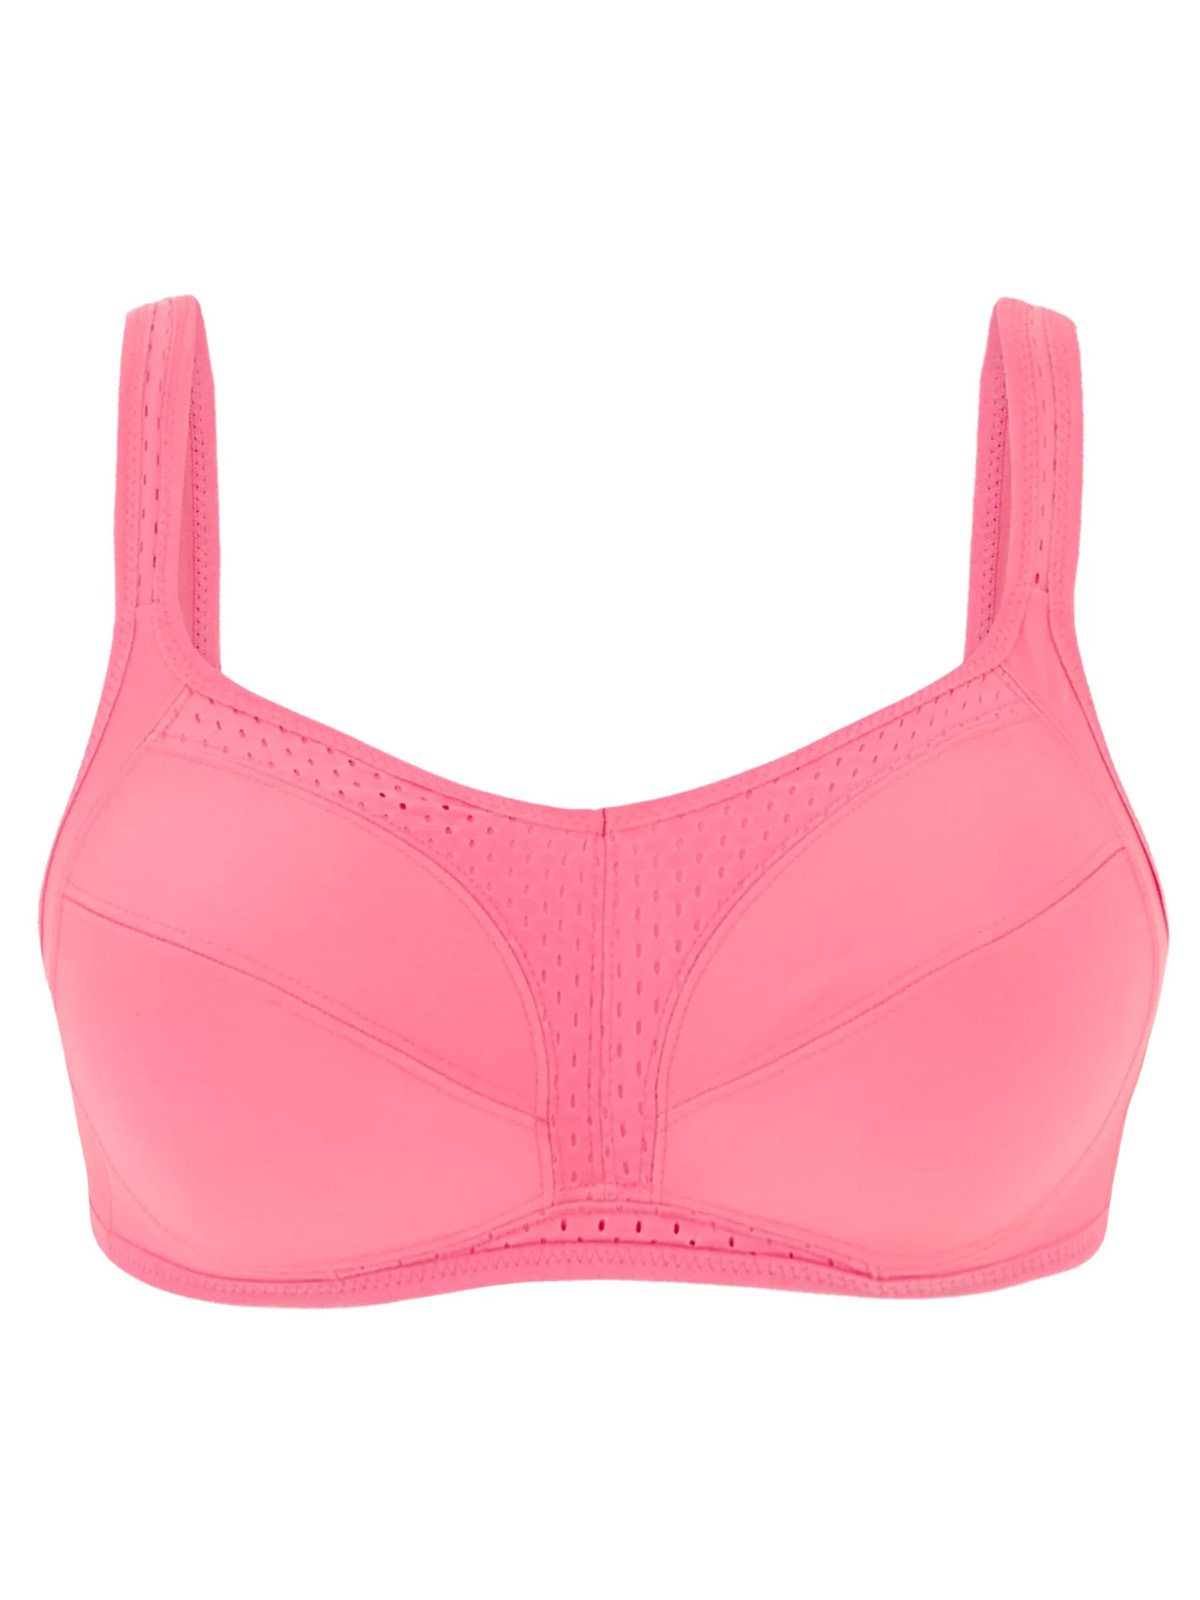 Marks and Spencer - - M&5 ASSORTED Full Cup, Balcony & Sports Bras ...